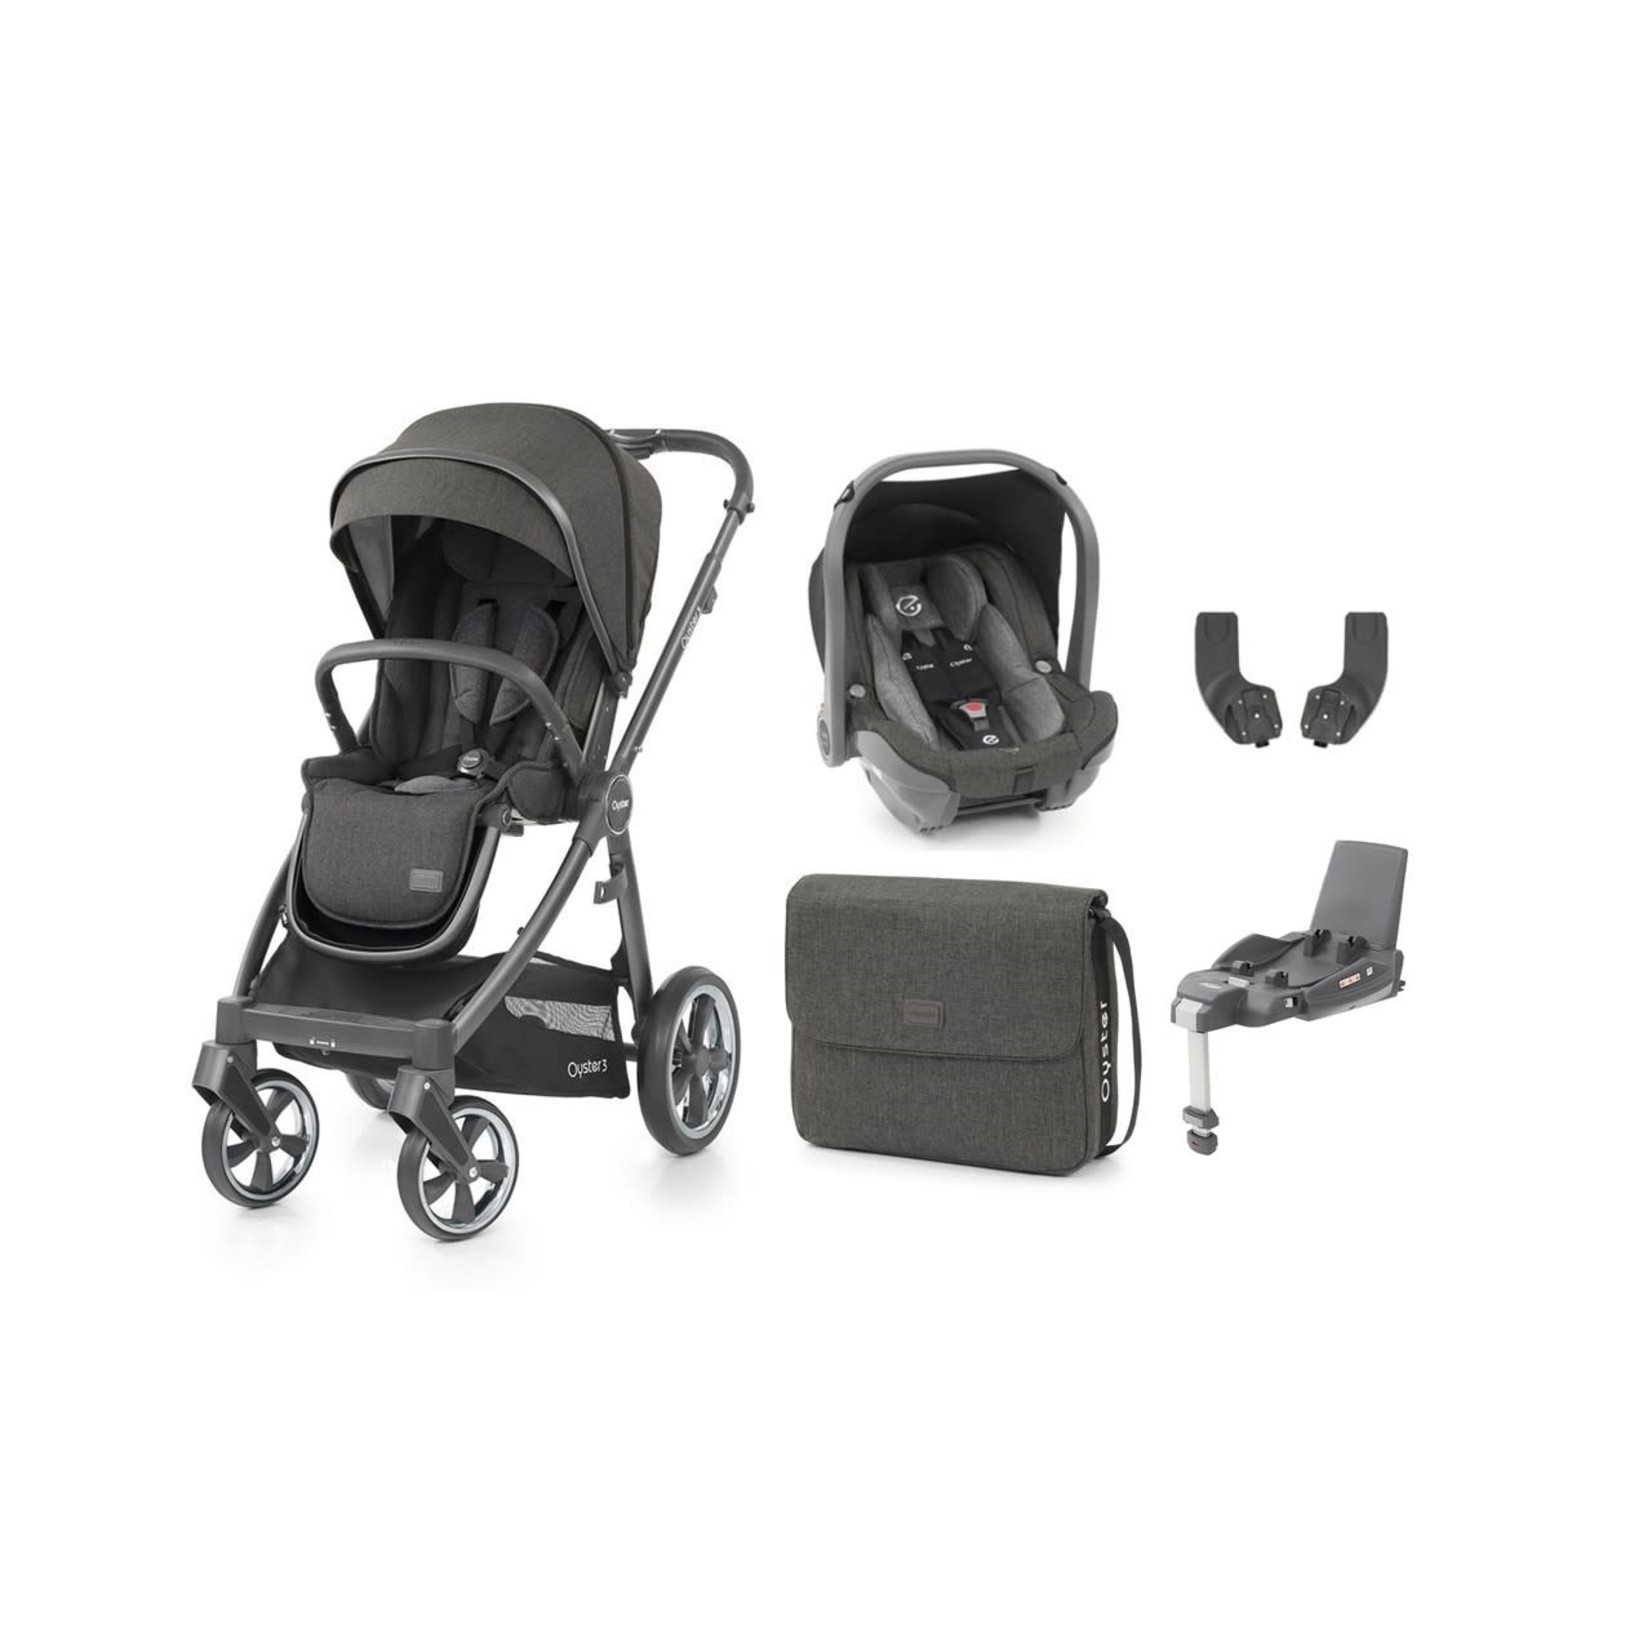 OYSTER BABYSTYLE OYSTER 3 ( 2 IN 1 ) INFANT CARSEAT TRAVEL SYSTEM  inc. ISOFIX - PEPPER